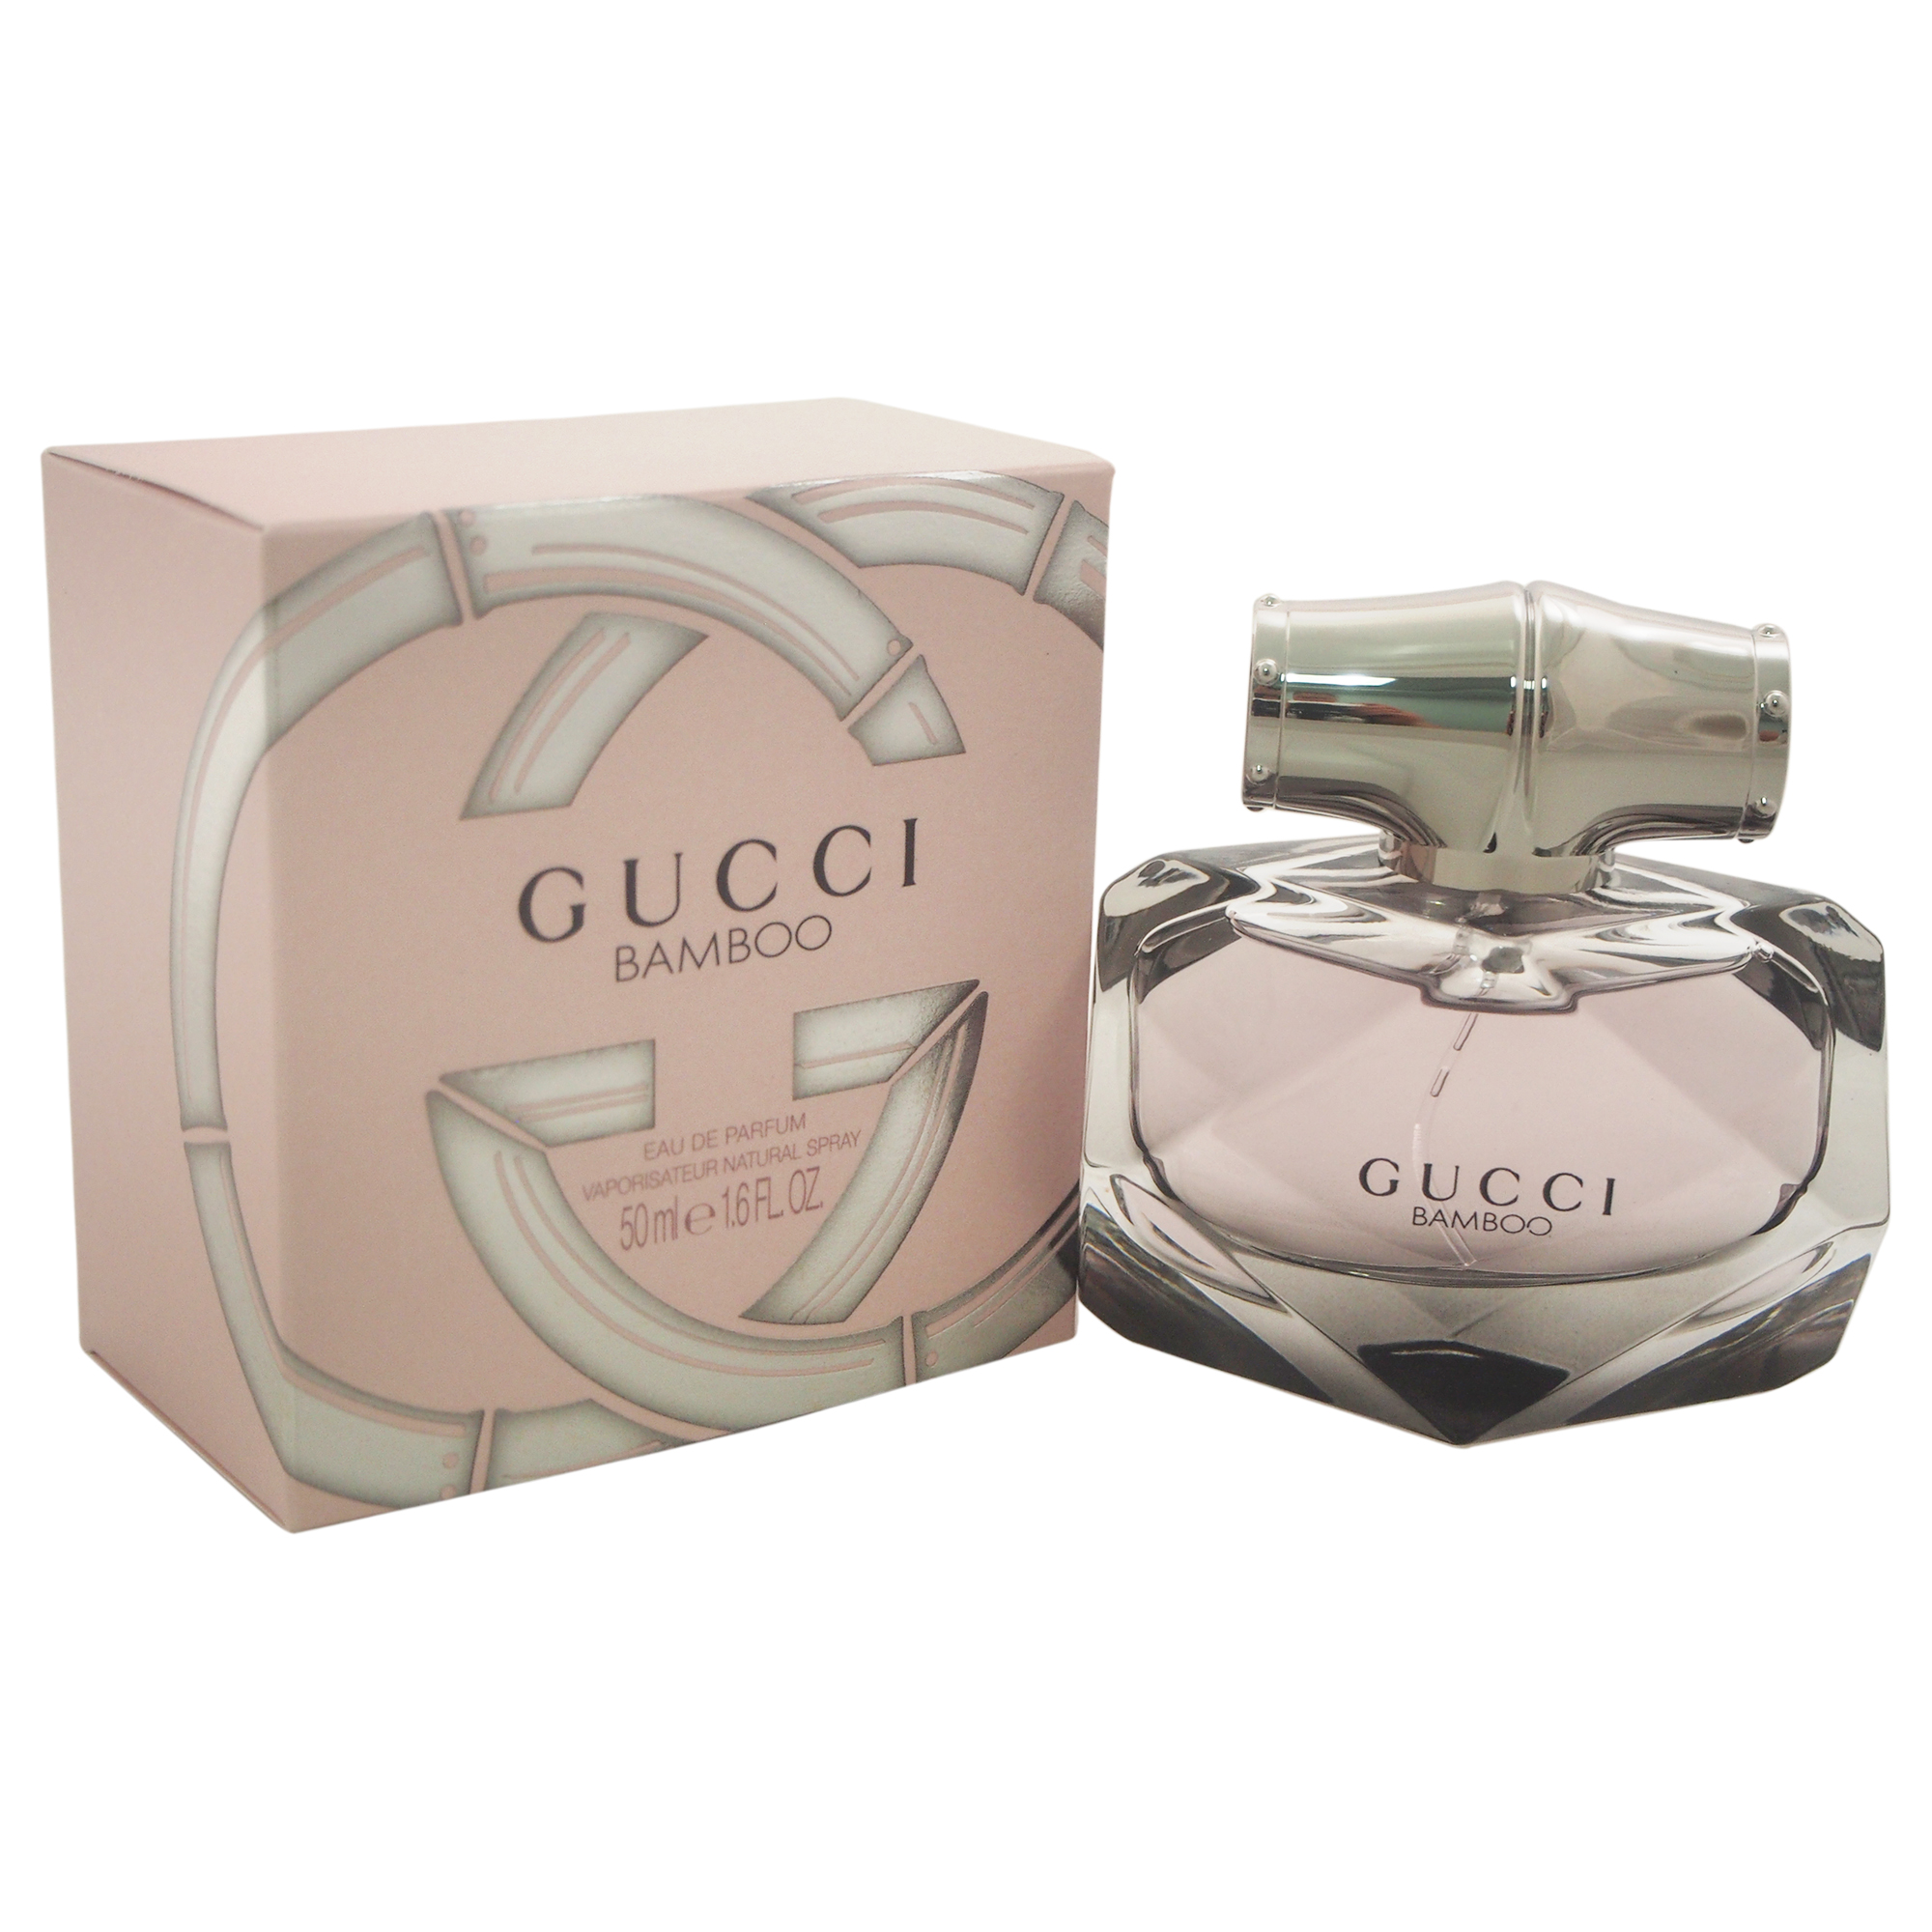 Bamboo by Gucci for Women - 1.7 oz EDP Spray